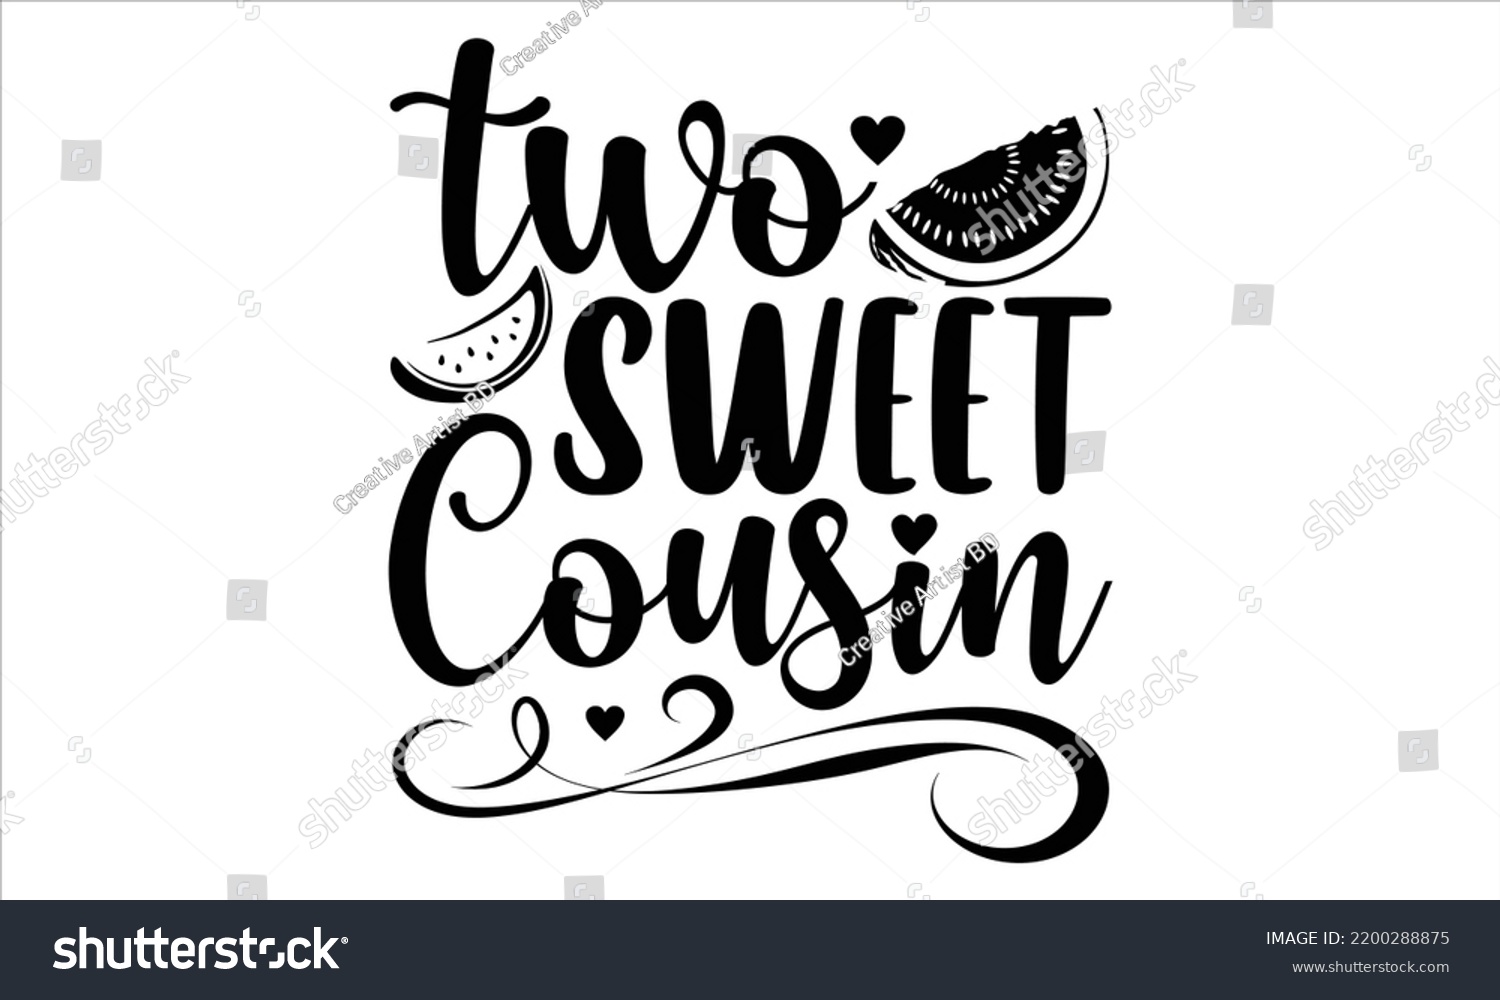 SVG of Two Sweet Cousin  - Watermelon T shirt Design, Modern calligraphy, Cut Files for Cricut Svg, Illustration for prints on bags, posters svg